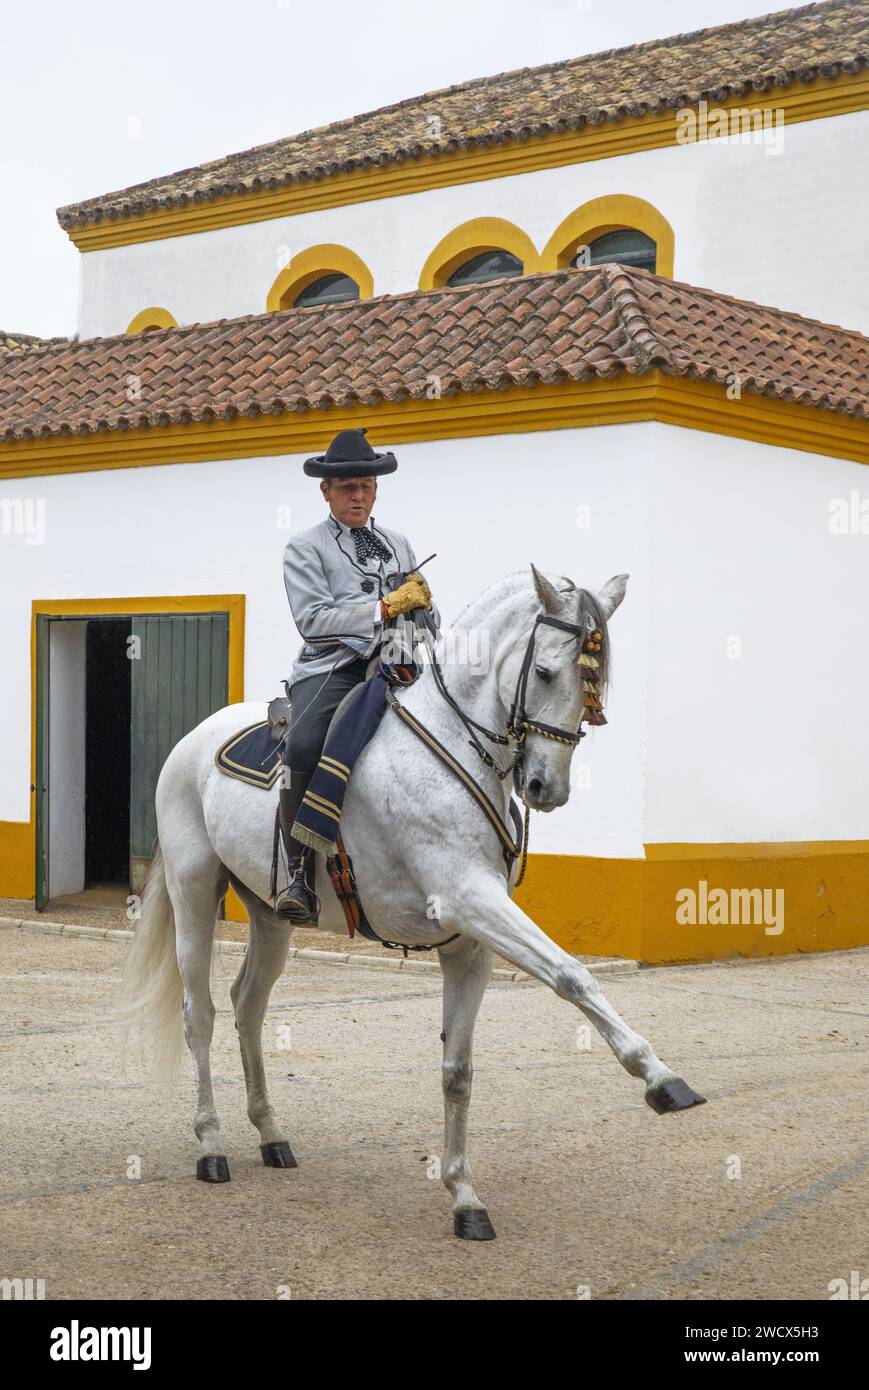 Spain, Andalusia, Jerez de la Frontera, royal Andalusian school of equestrian art, rider in Goyesque costume on a white horse performing a dressage exercise in the vaulted stables Stock Photo